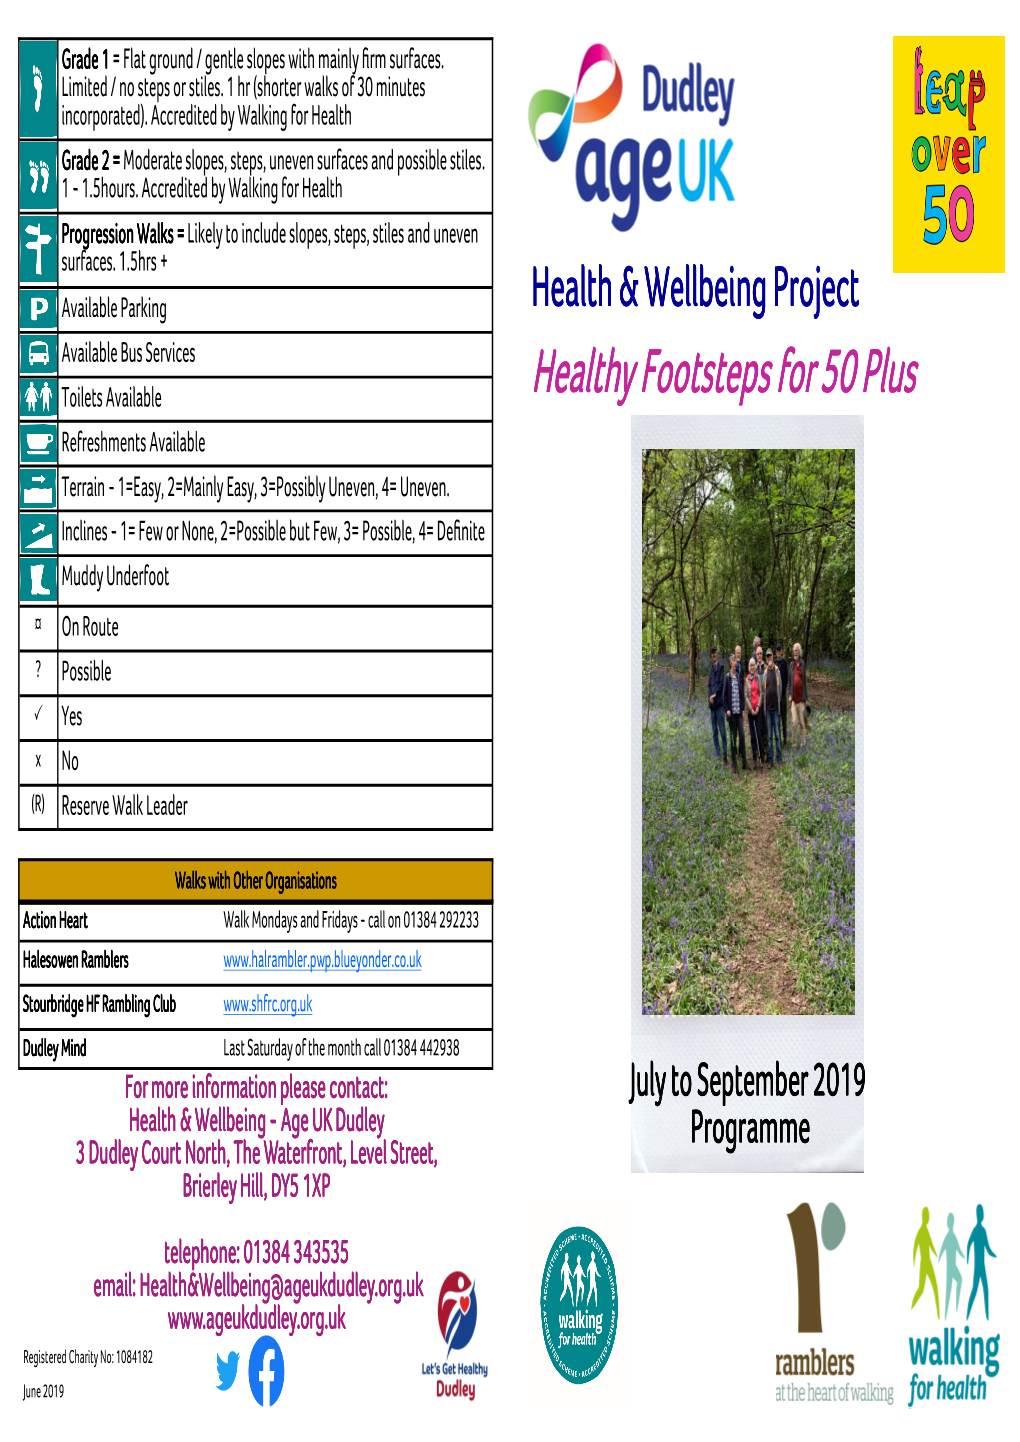 Healthy Footsteps for 50 Plus Refreshments Available Terrain � 1=Easy, 2=Mainly Easy, 3=Possibly Uneven, 4= Uneven